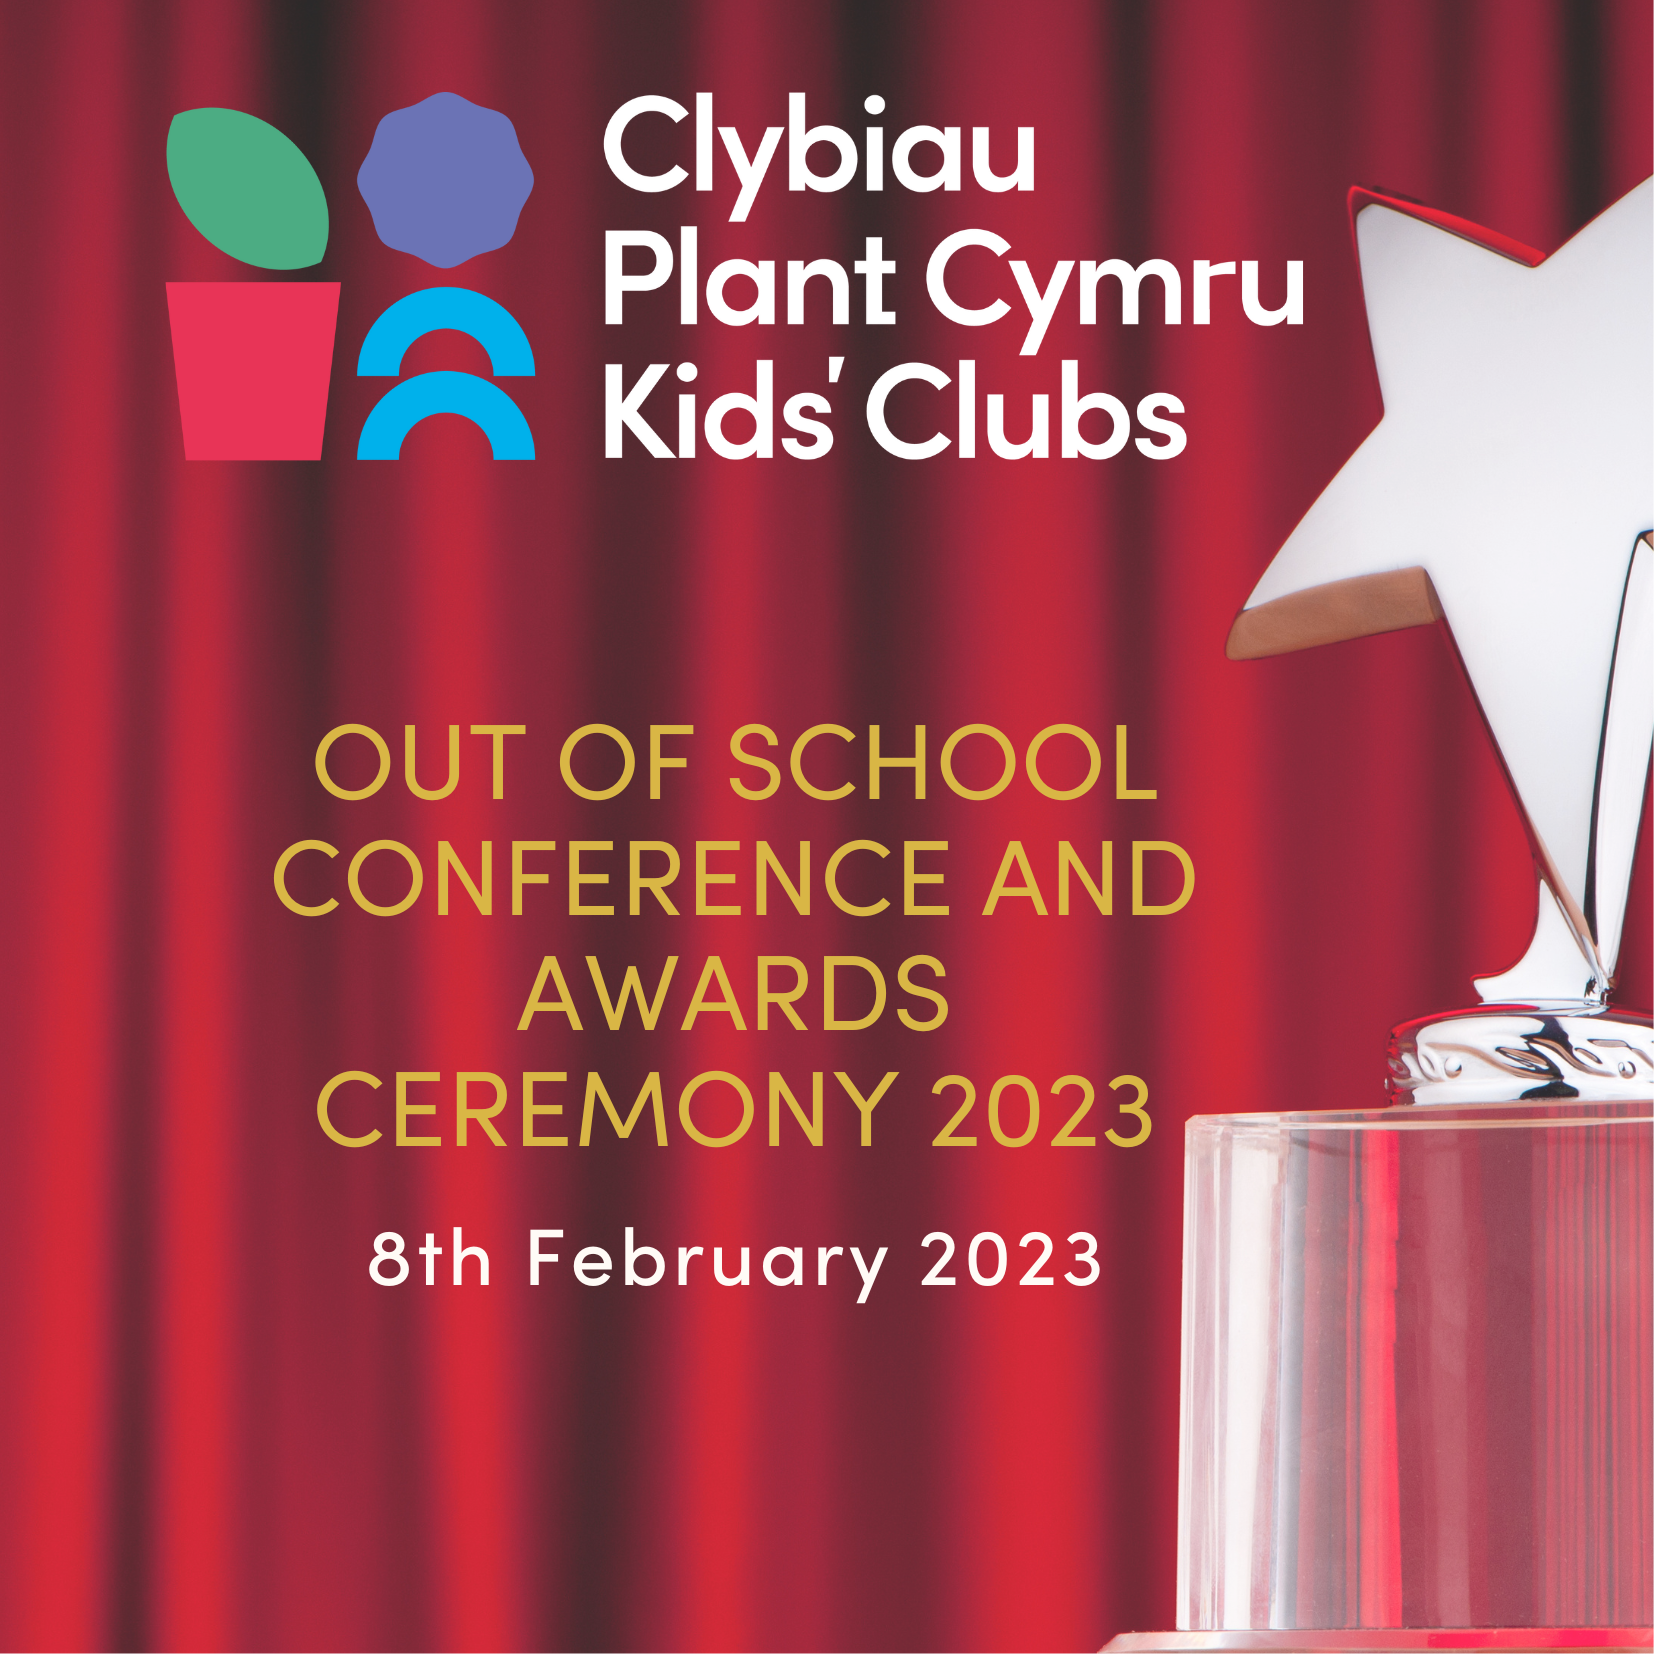 Clybiau Plant Cymru Kids’ Clubs’ Out of School Conference and Awards Ceremony 2023